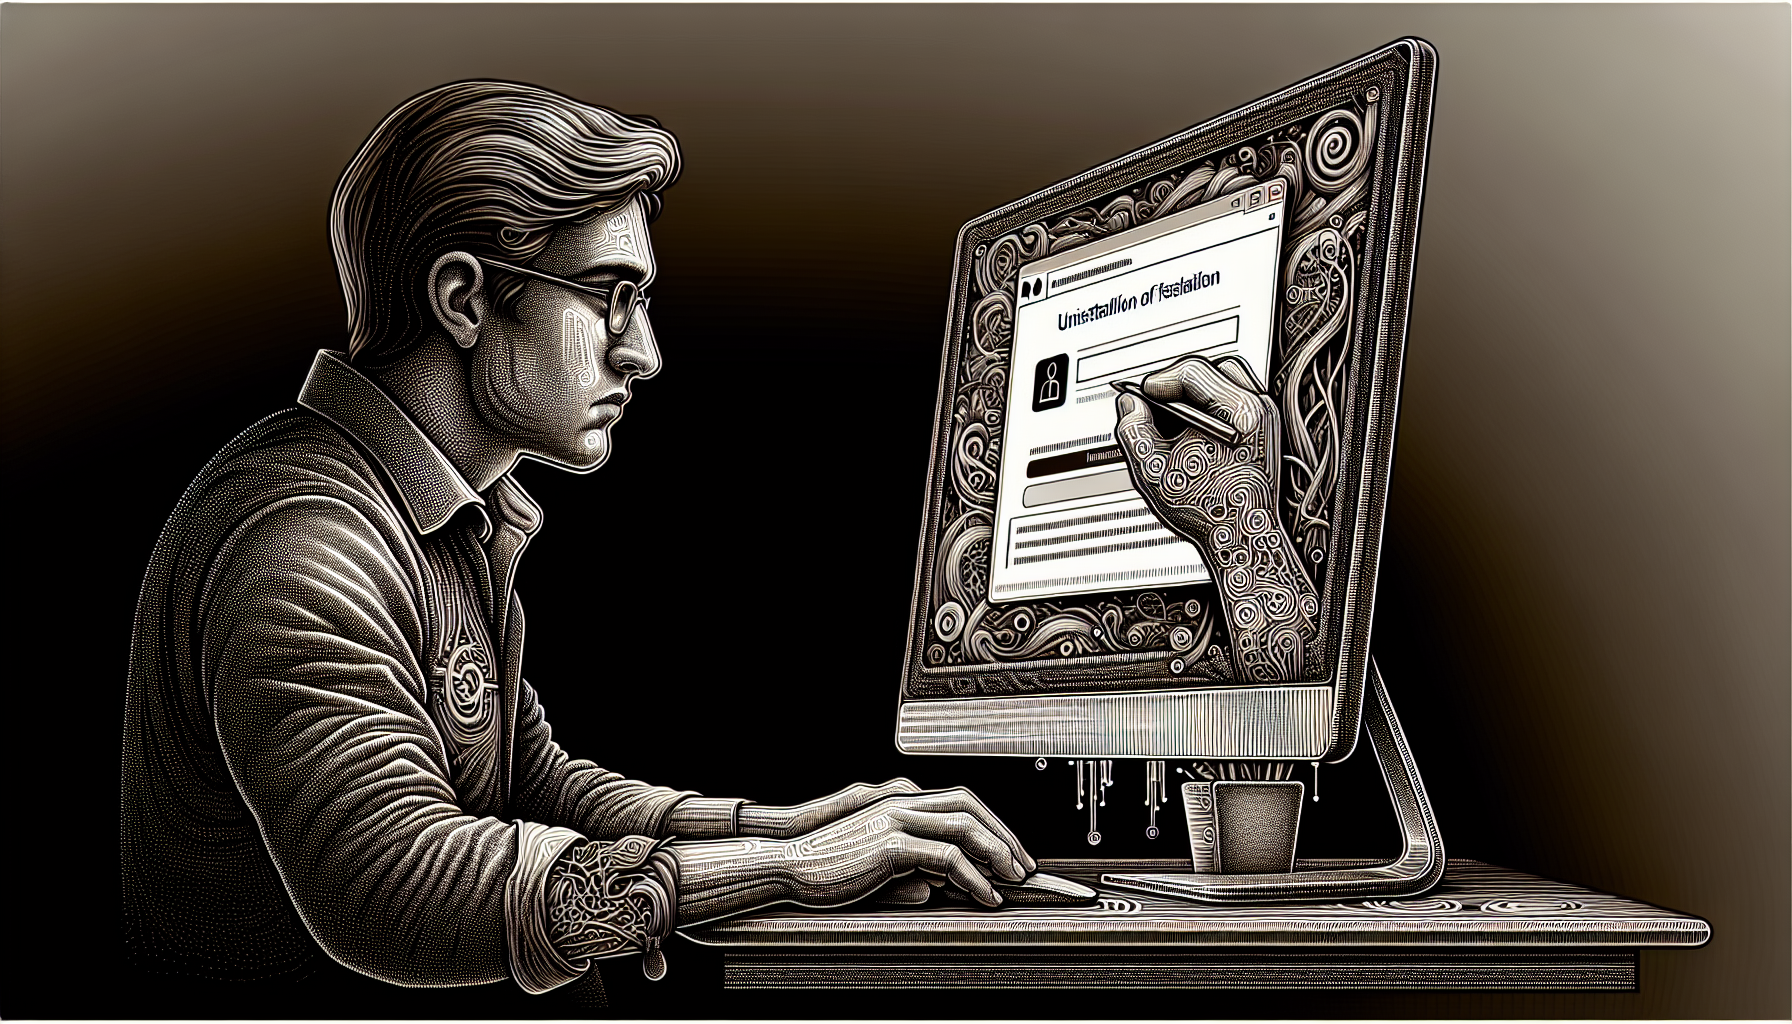 Illustration of a person removing third-party software from their computer